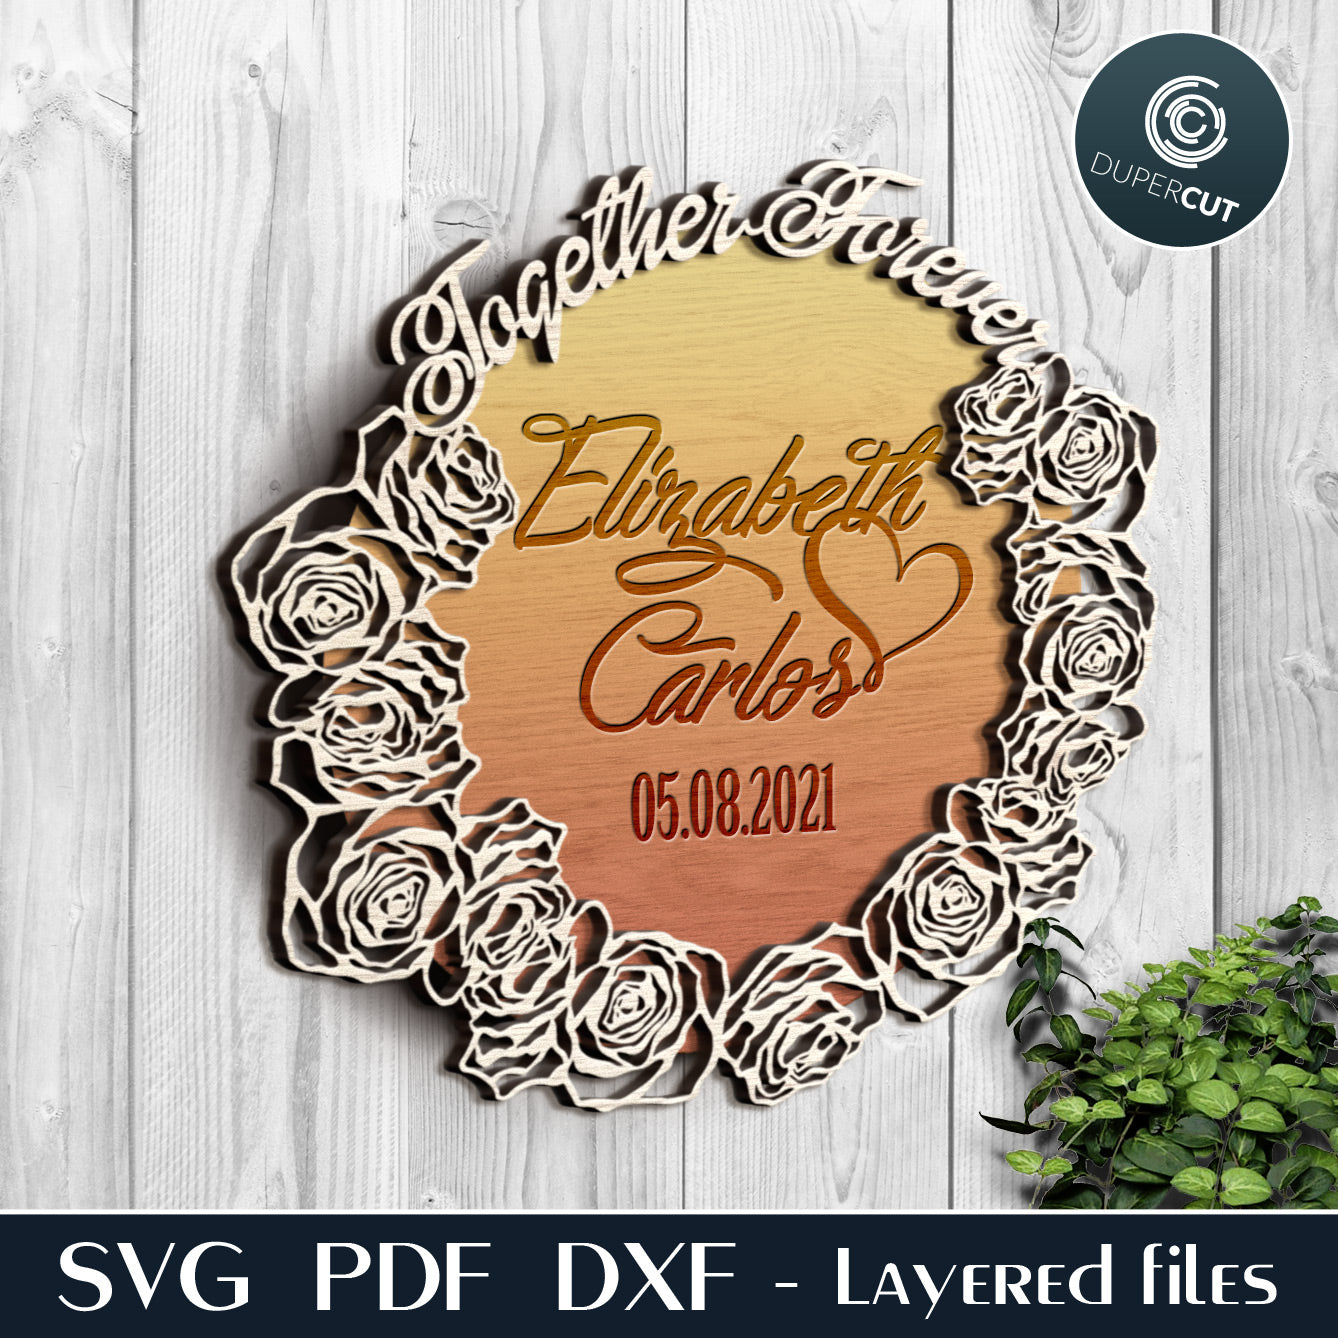 Engrave personalized text - floral wedding  frame  layered files - SVG PDF DXF template for laser cutting and engraving, Glowforge, Cricut, Silhouette Cameo, CNC plasma machines